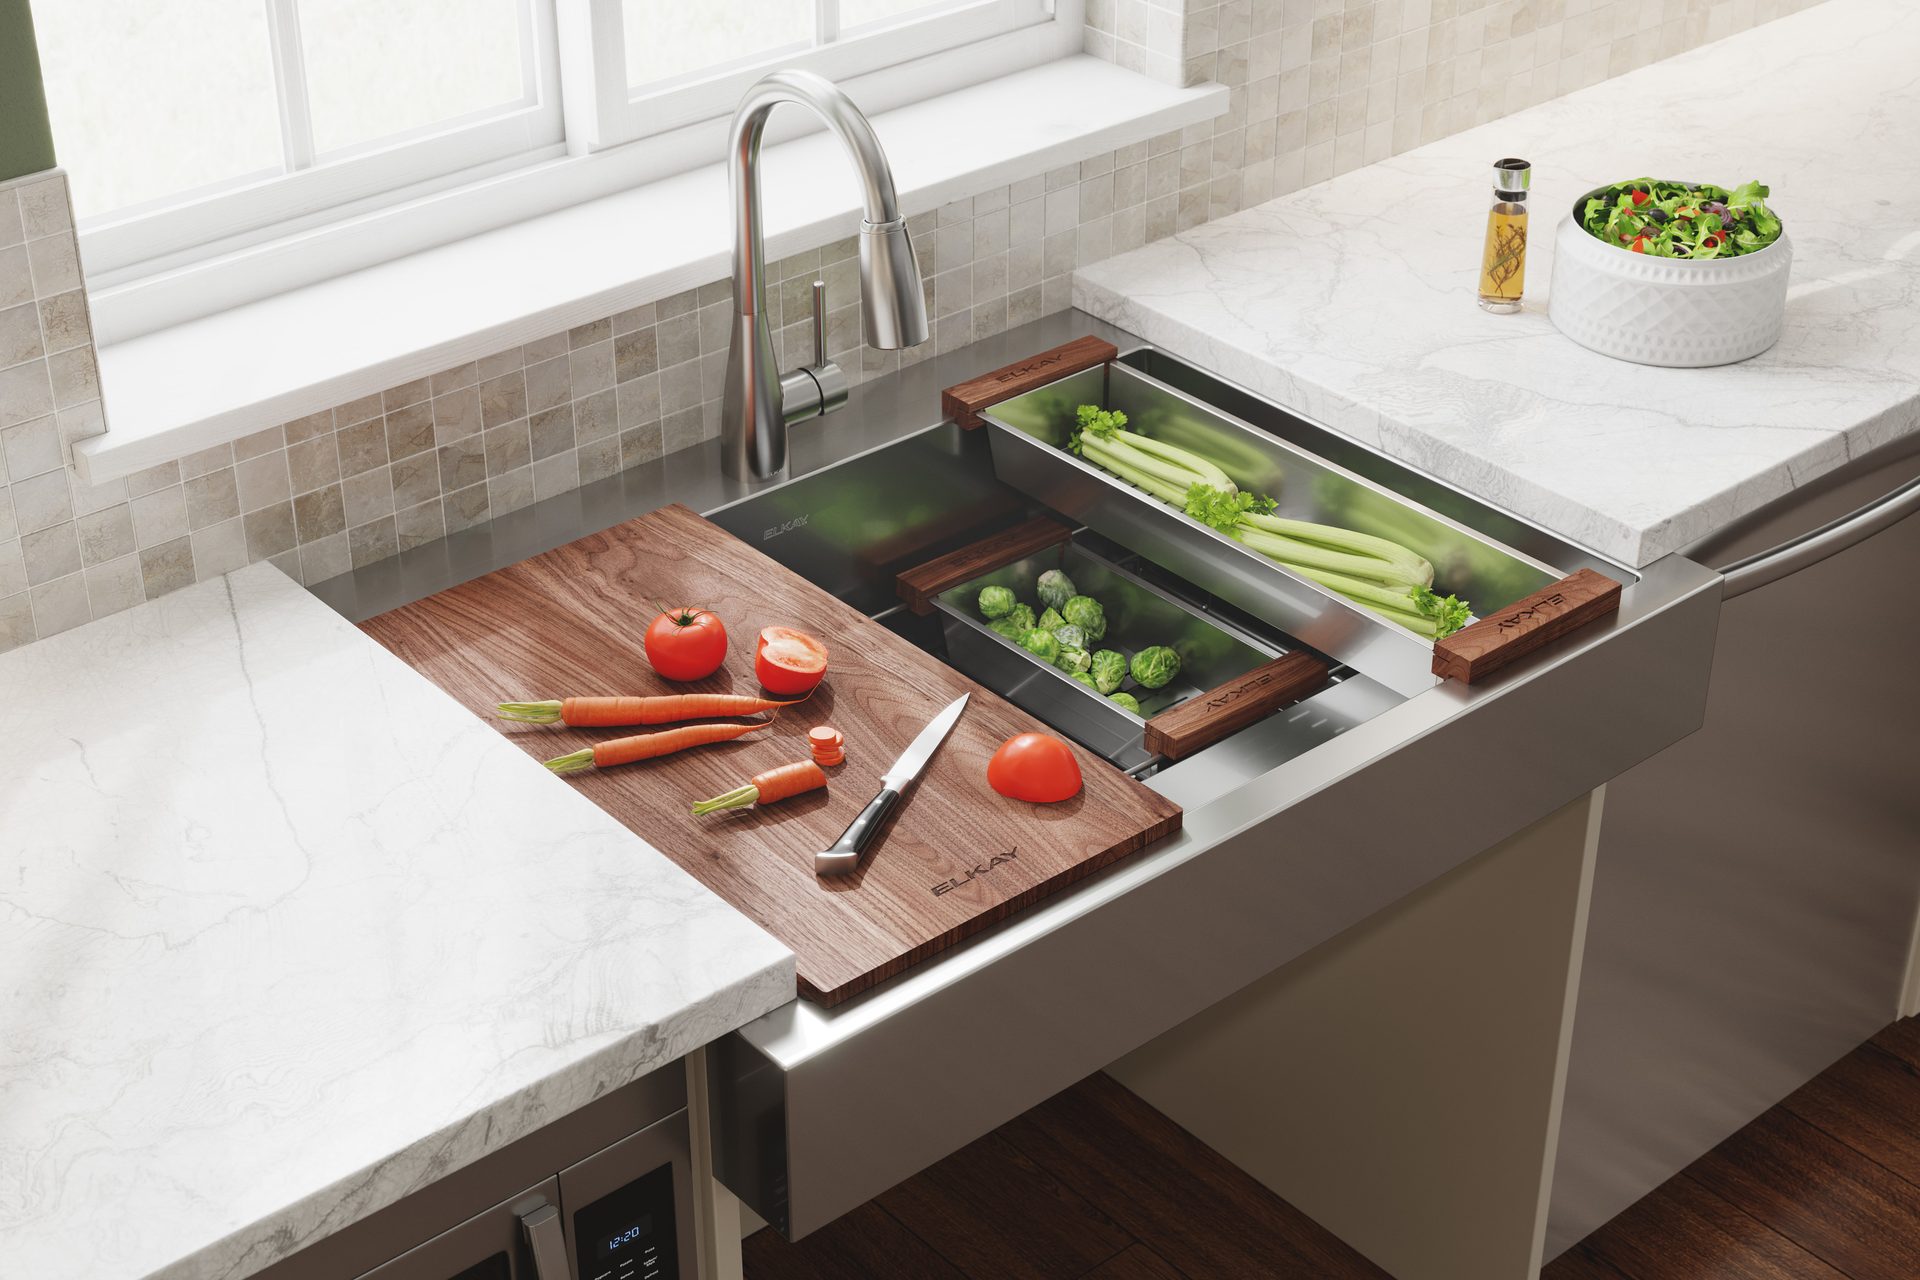 Kitchen sink, Interior design, Countertop, Property, Food, Tap, Cabinetry